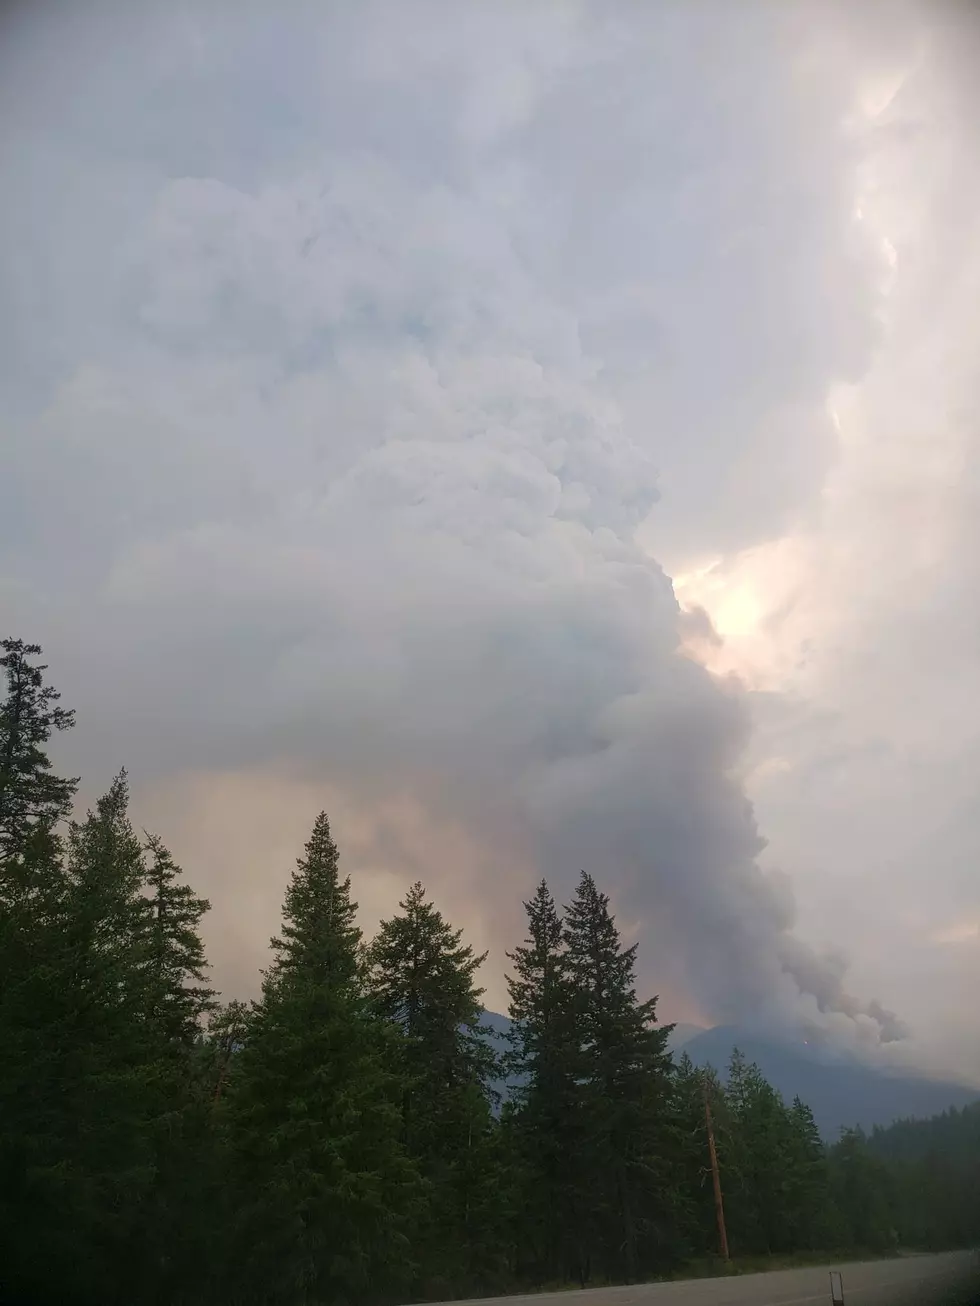 Joint Federal/State Team Now Managing Mazama Fires